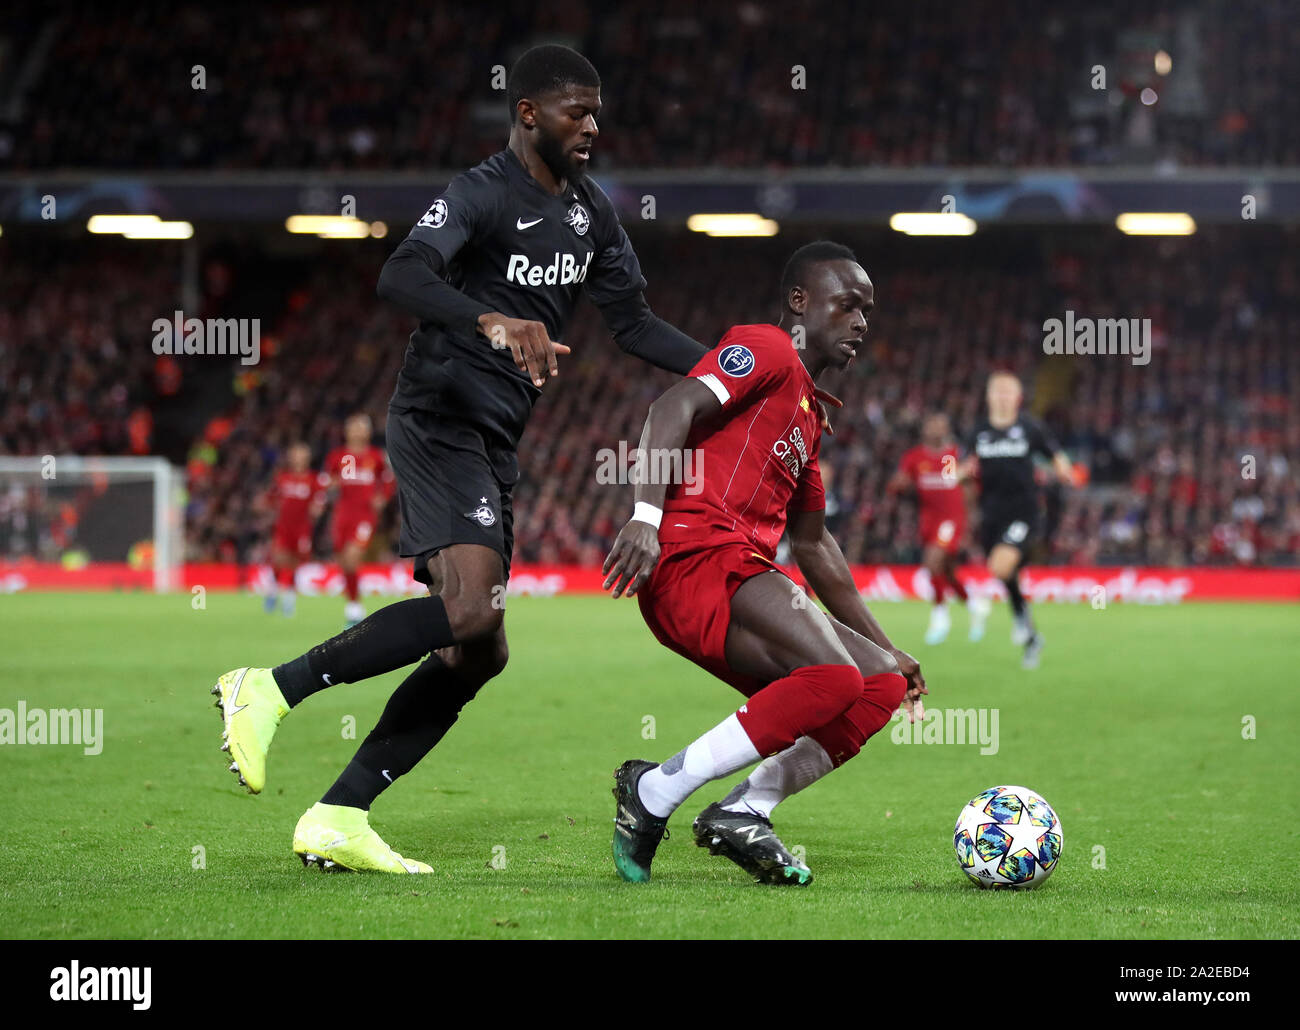 Red Bull Salzburg's Jerome Onguene (left) and Liverpool's Sadio Mane battle for the ball during the UEFA Champions League Group E match at Anfield, Liverpool. Stock Photo